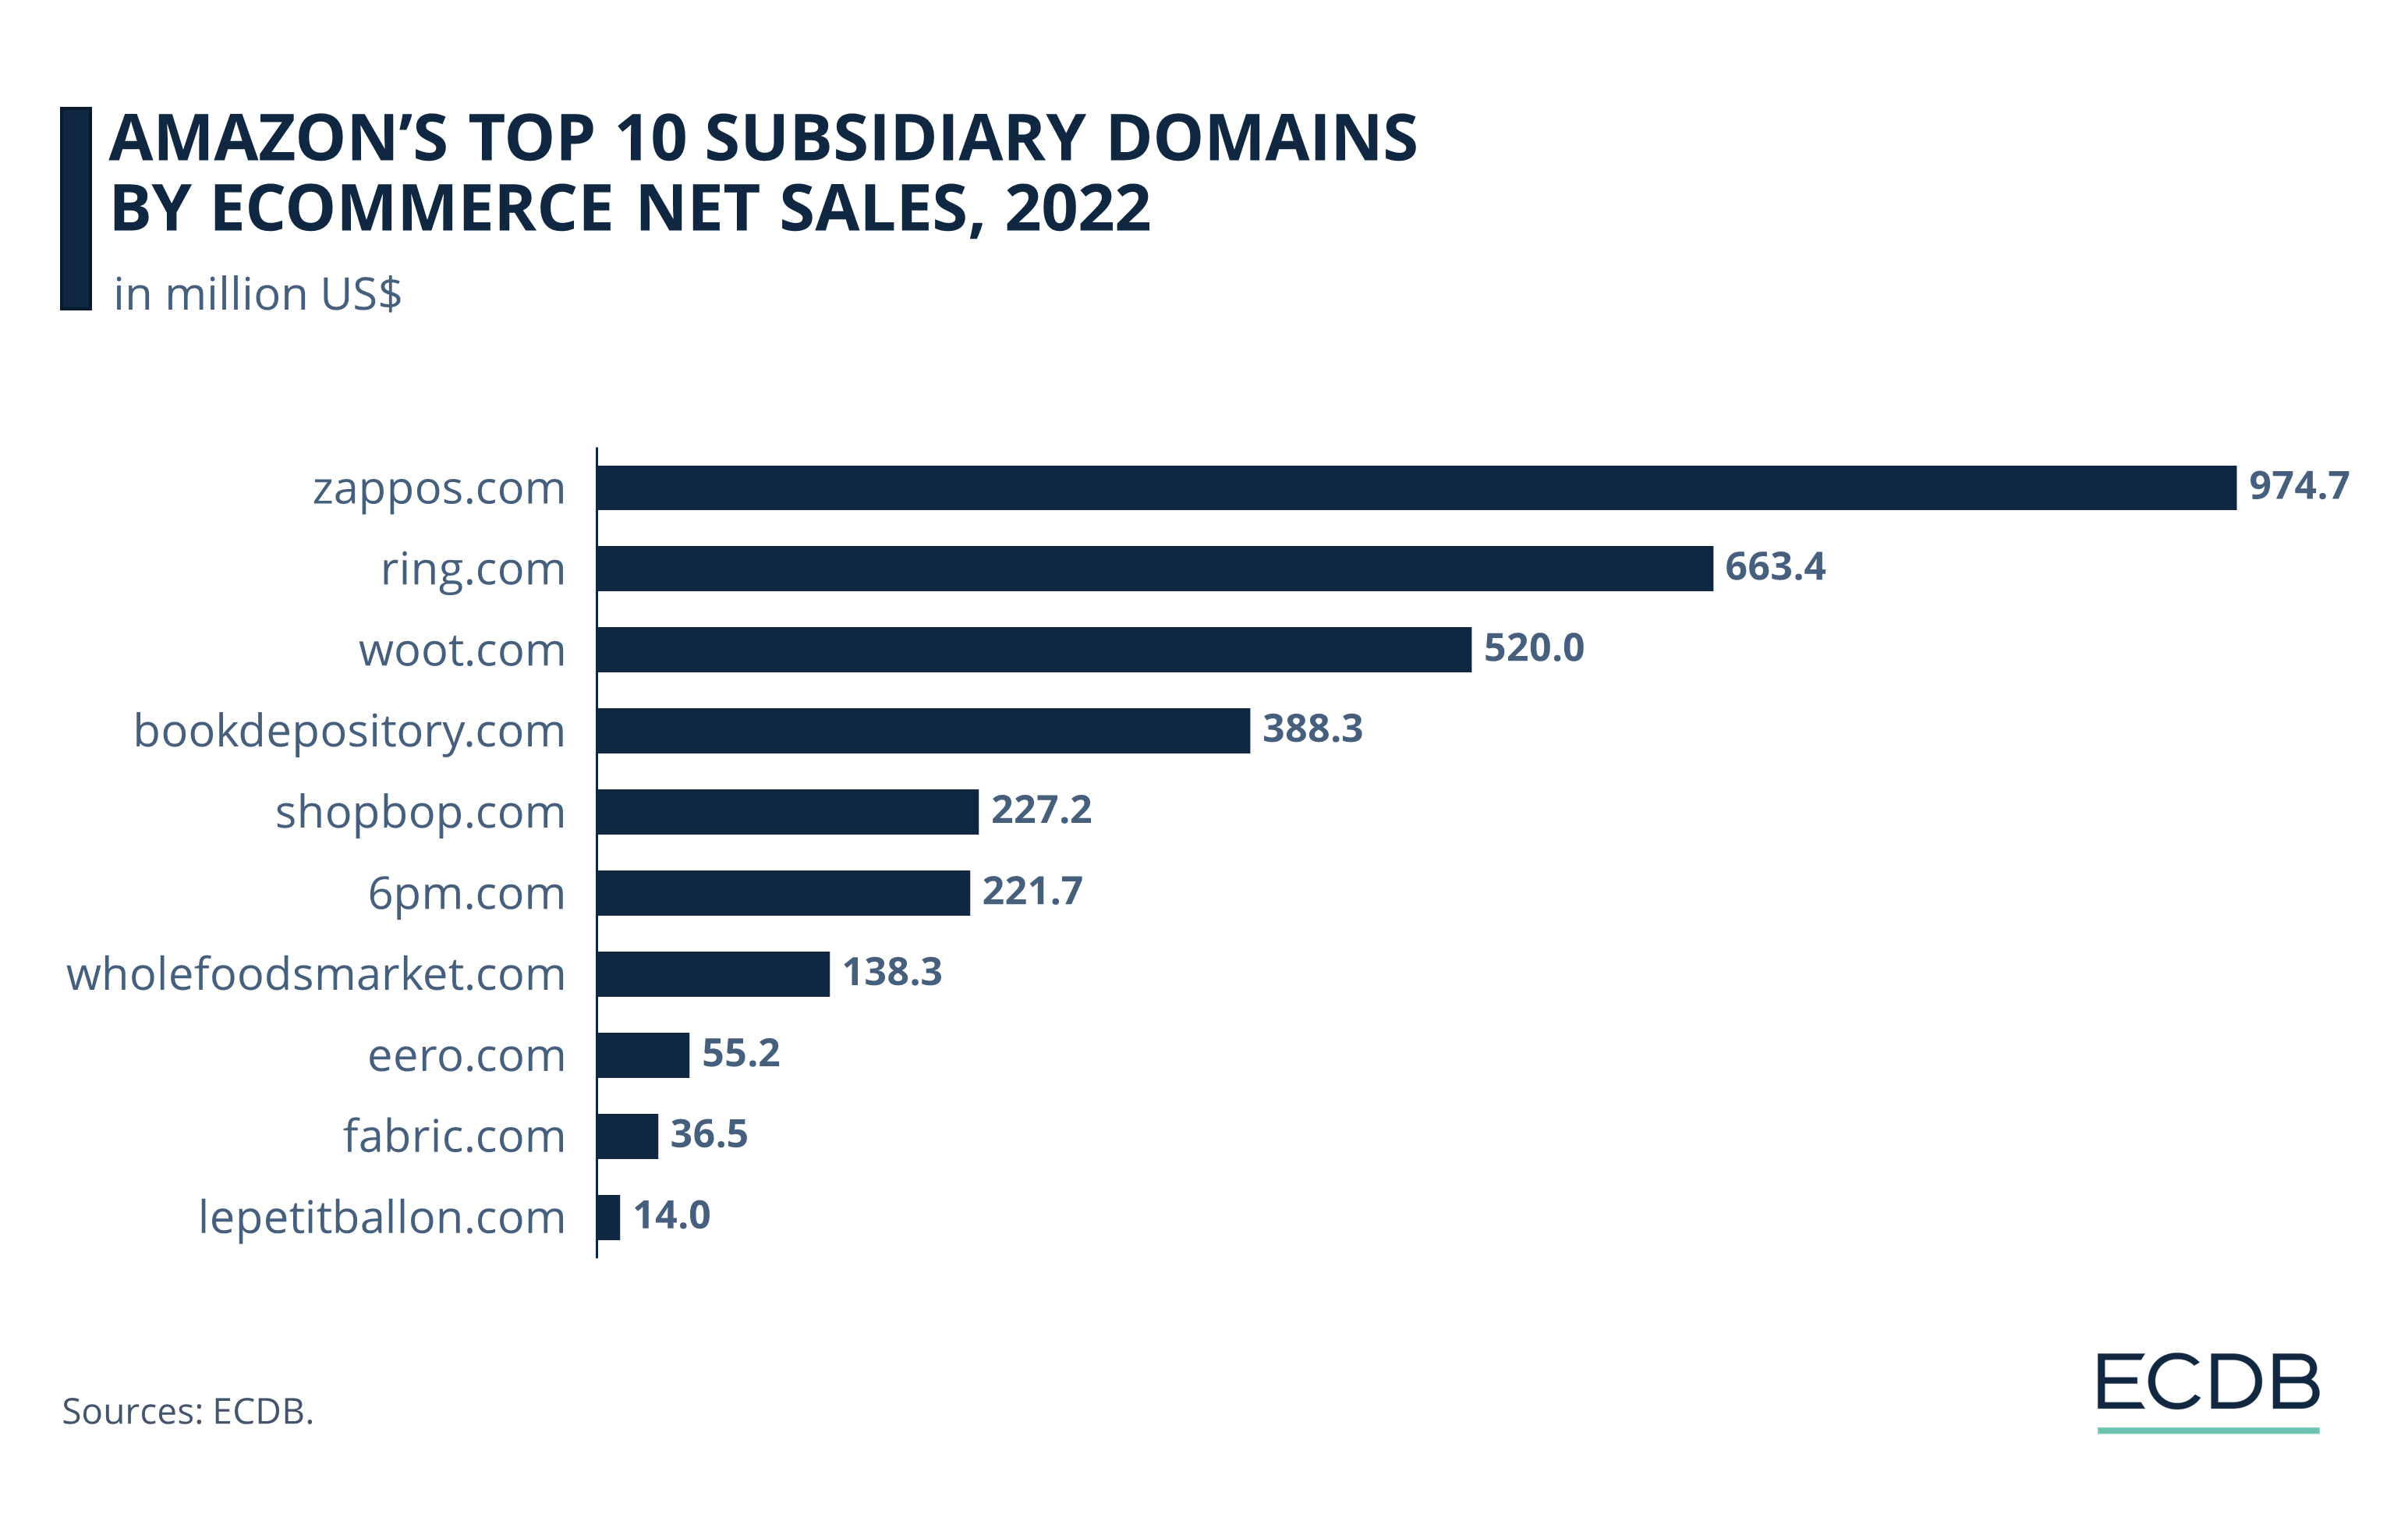 Amazon's Top 10 Subsidiary Domains by eCommerce Net Sales, 2022